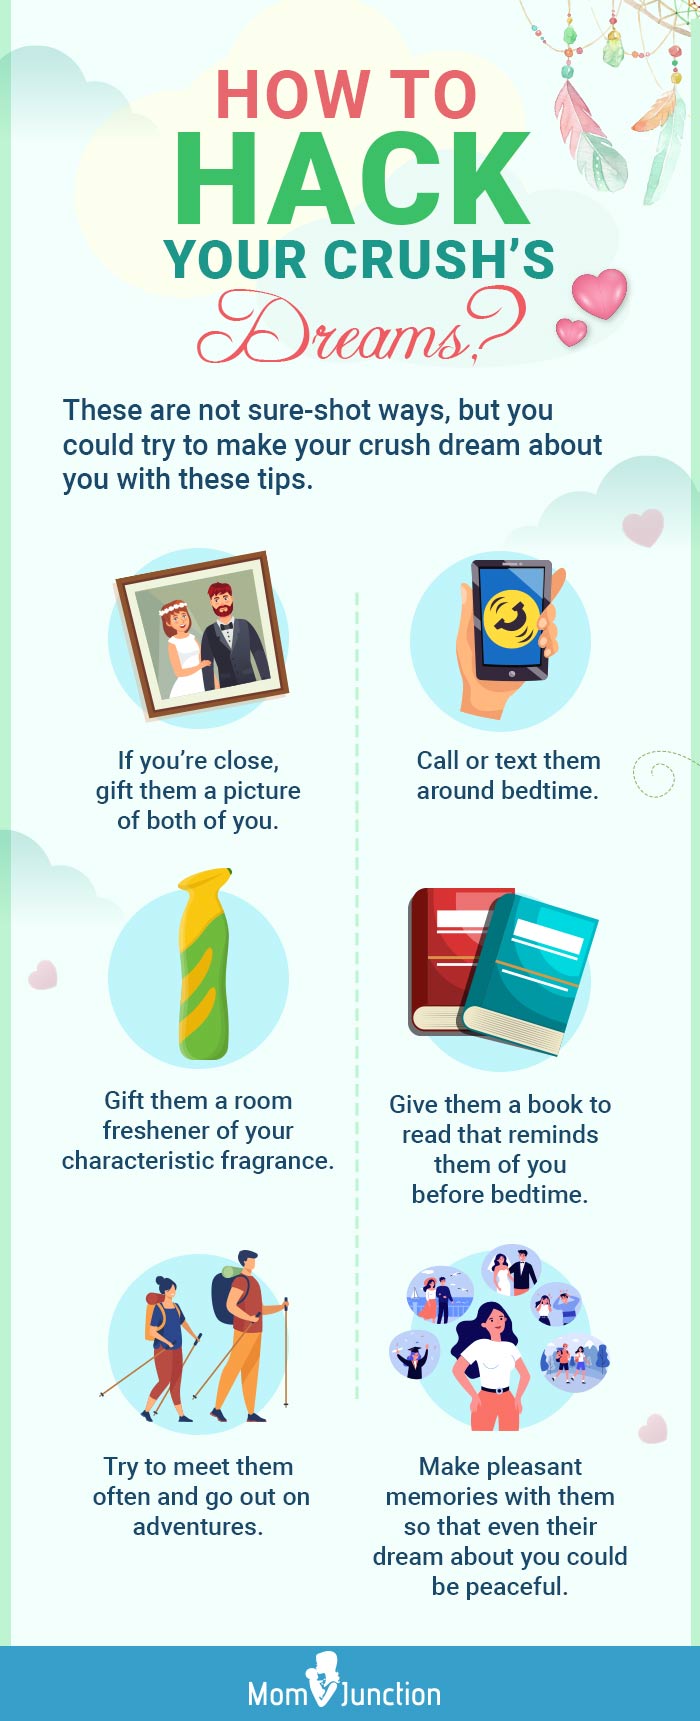 how to hack your crush’s dreams (infographic)